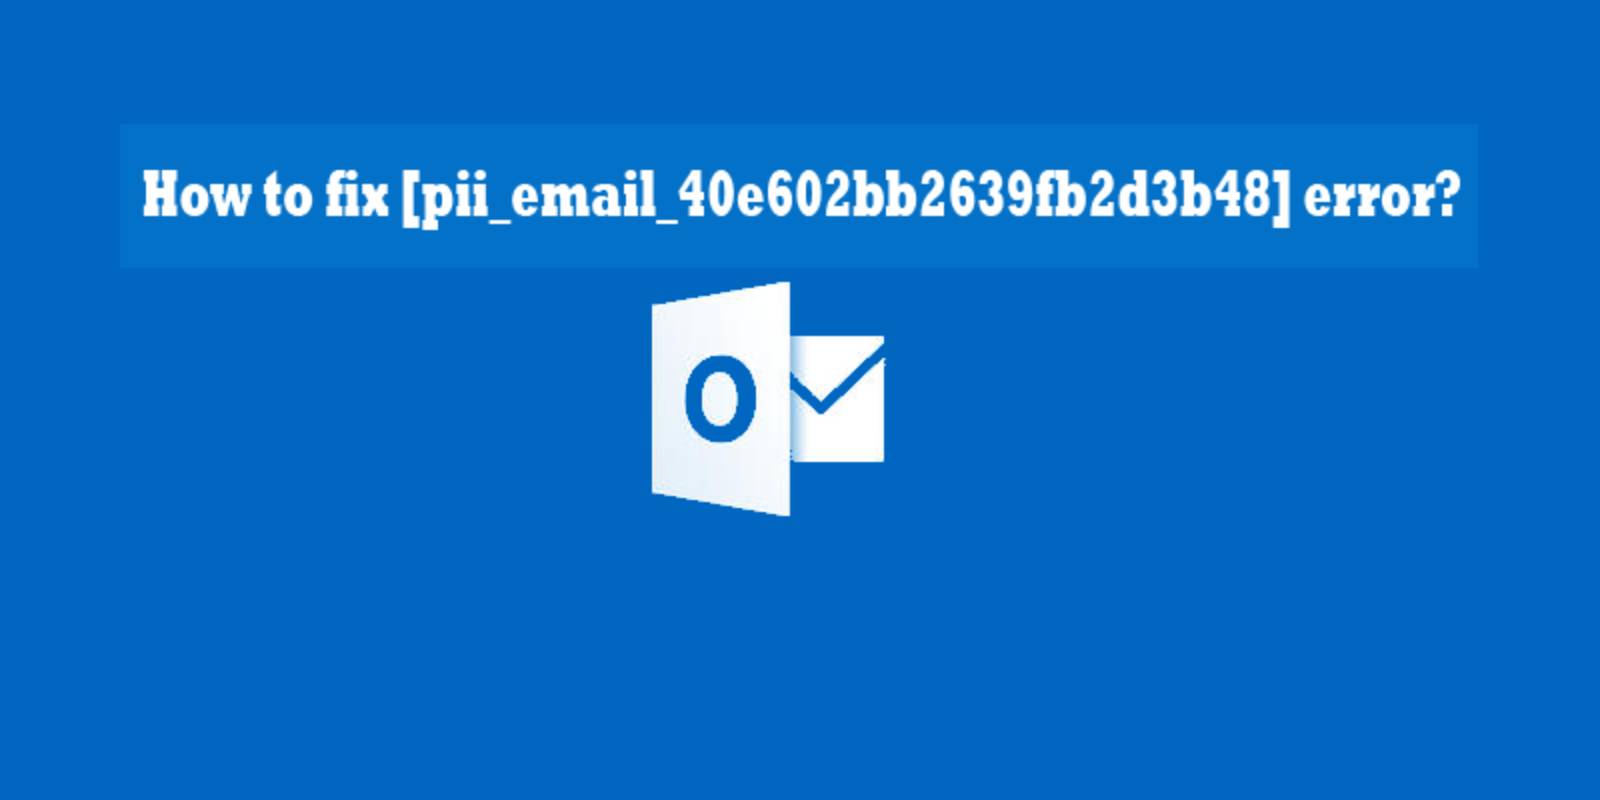 How to fixed [pii_email_40e602bb2639fb2d3b48] error code in 2022?